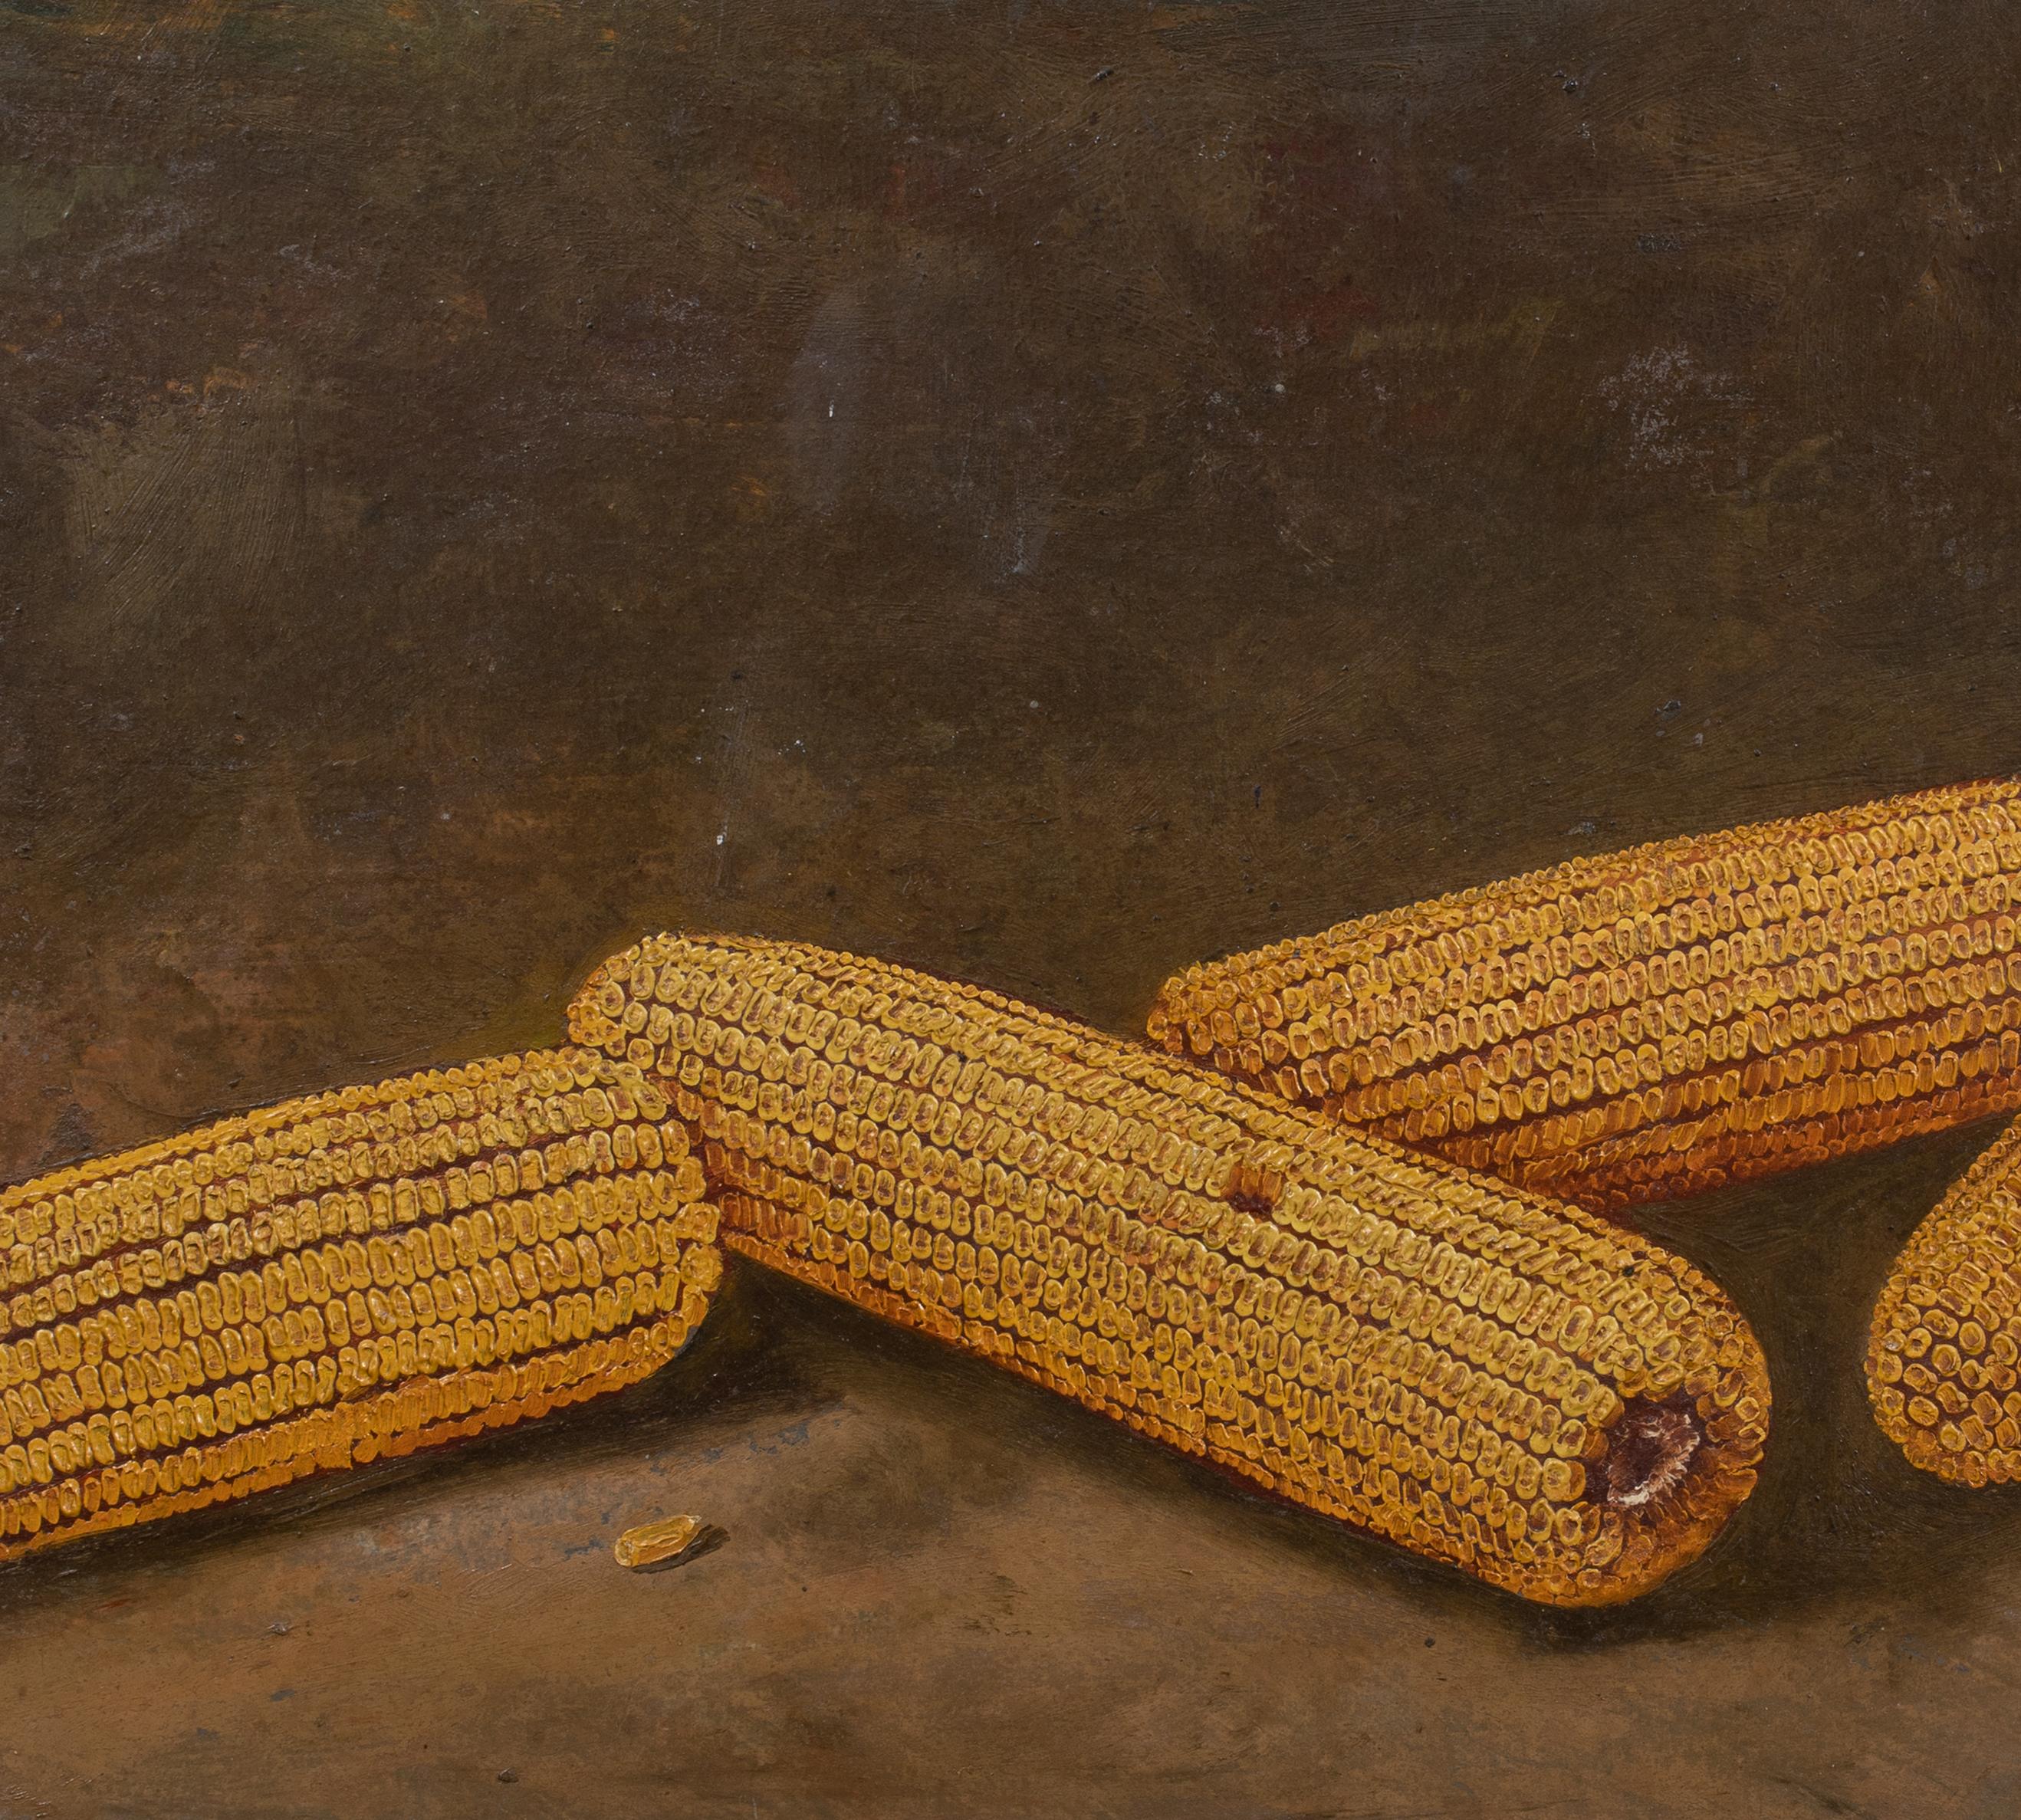 Study of Corn On The Cob, 19th Century - Brown Still-Life Painting by alfred montgomery